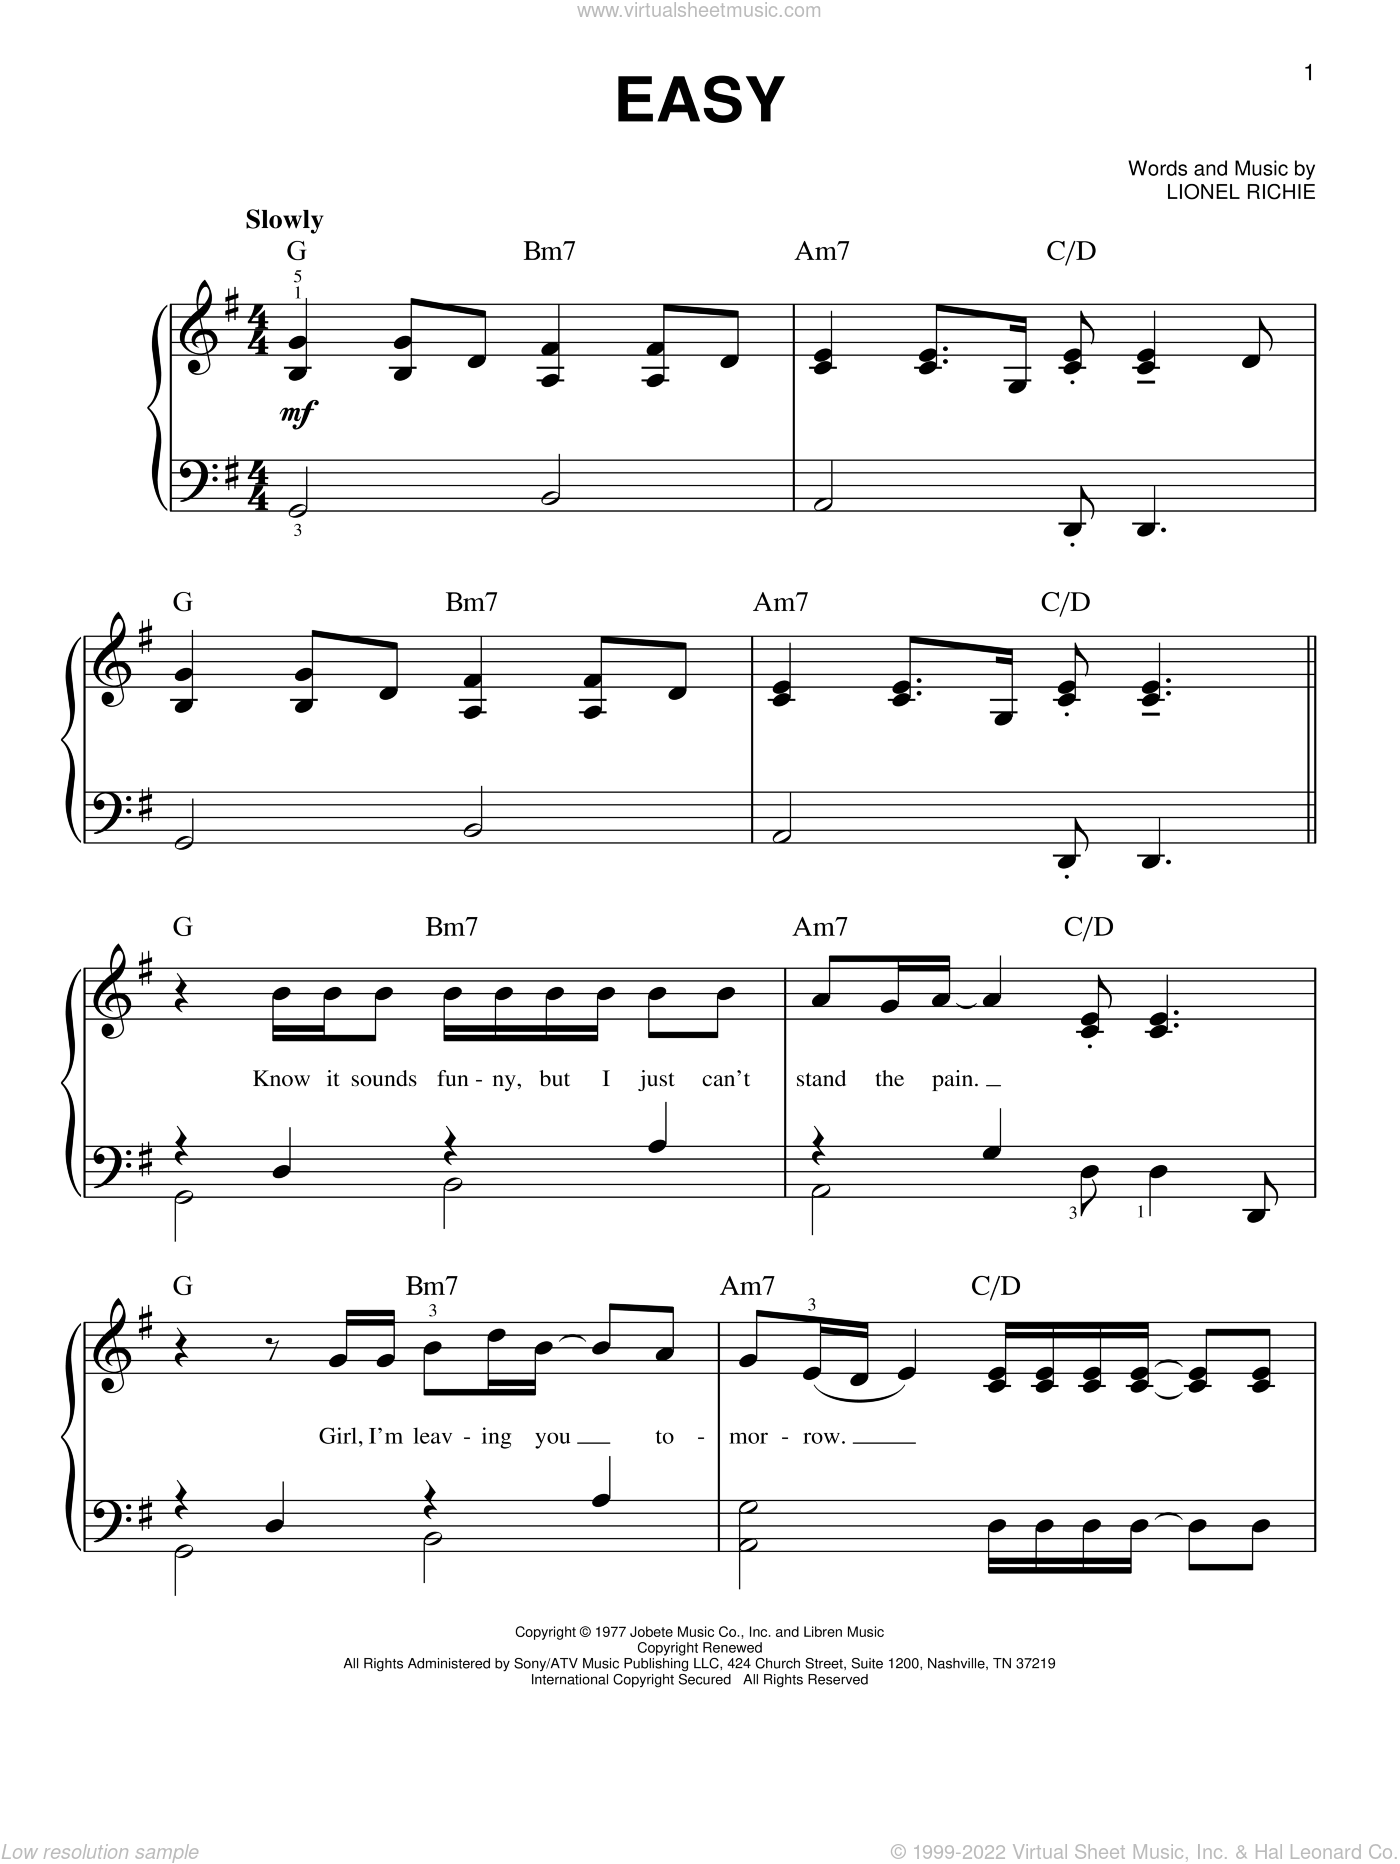 Commodores - Easy sheet music (easy) for piano solo